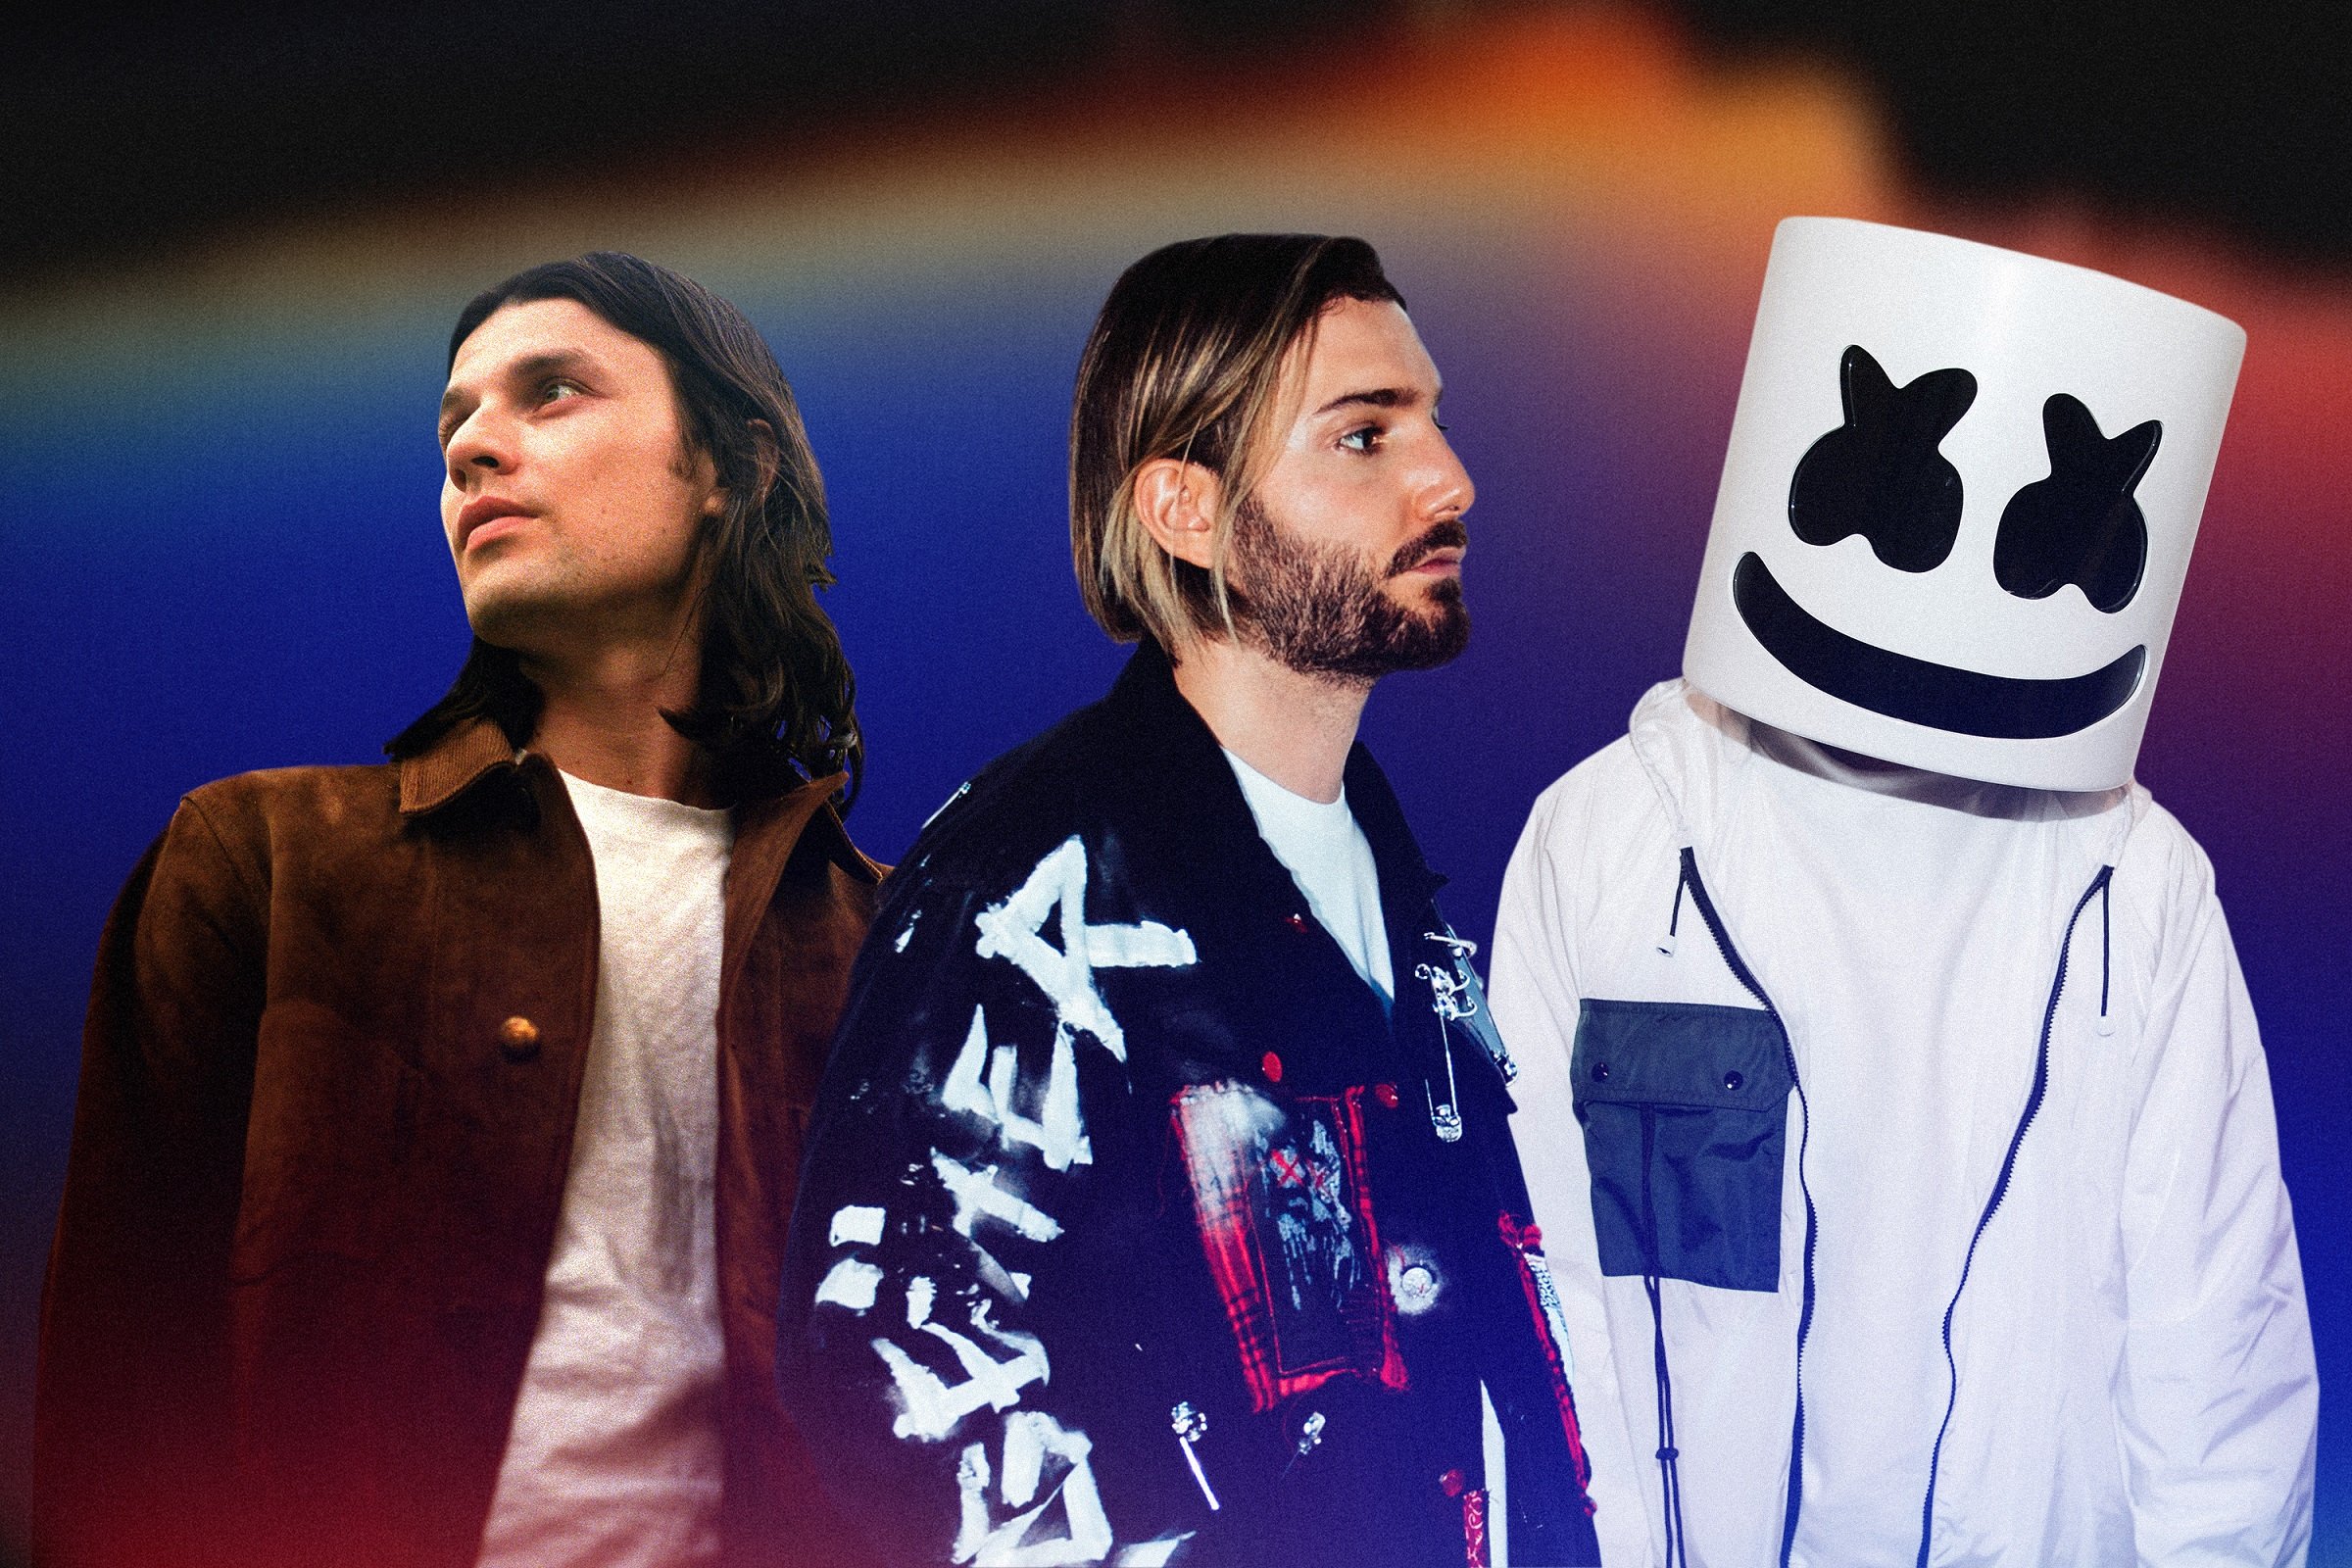 Alesso Drops Energetic VIP of “Chasing Stars” with Marshmello & James Bay [LISTEN]